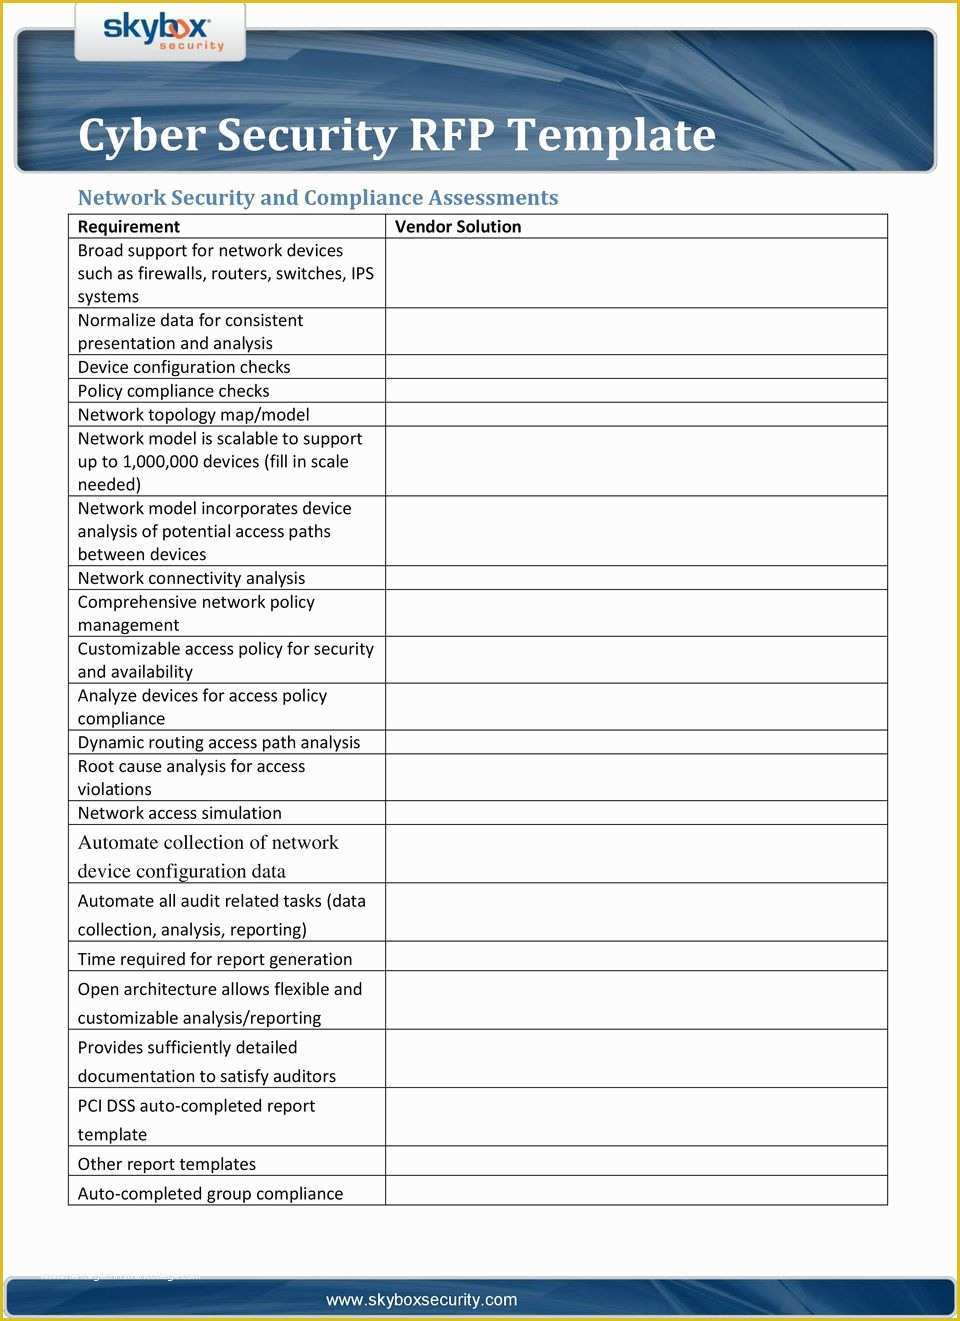 Pci Compliance Policy Templates Free Of Cyber Security Rfp Template Pdf